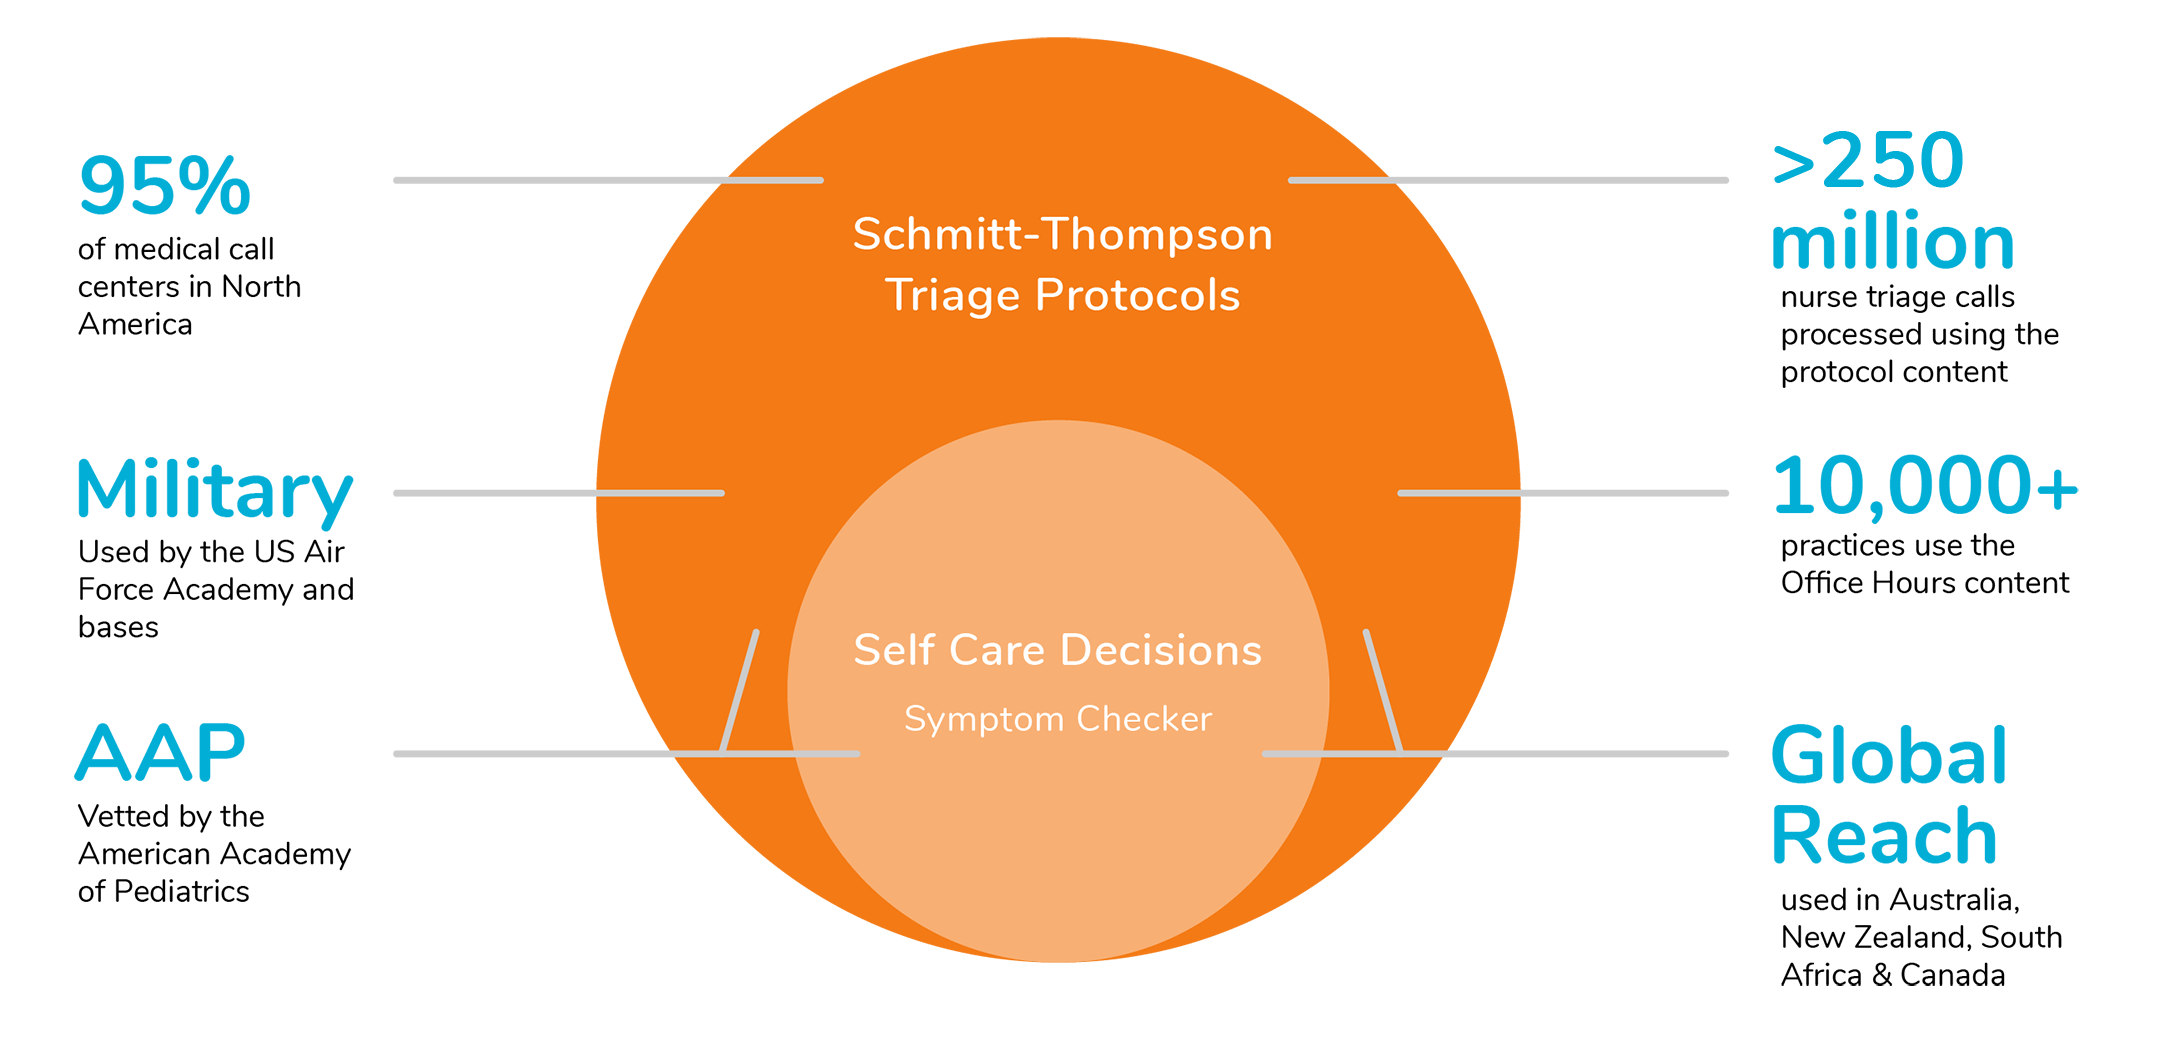 Graphic illustrating how Barton Schmitt triage protocols and our medical symptom checker are used around the world